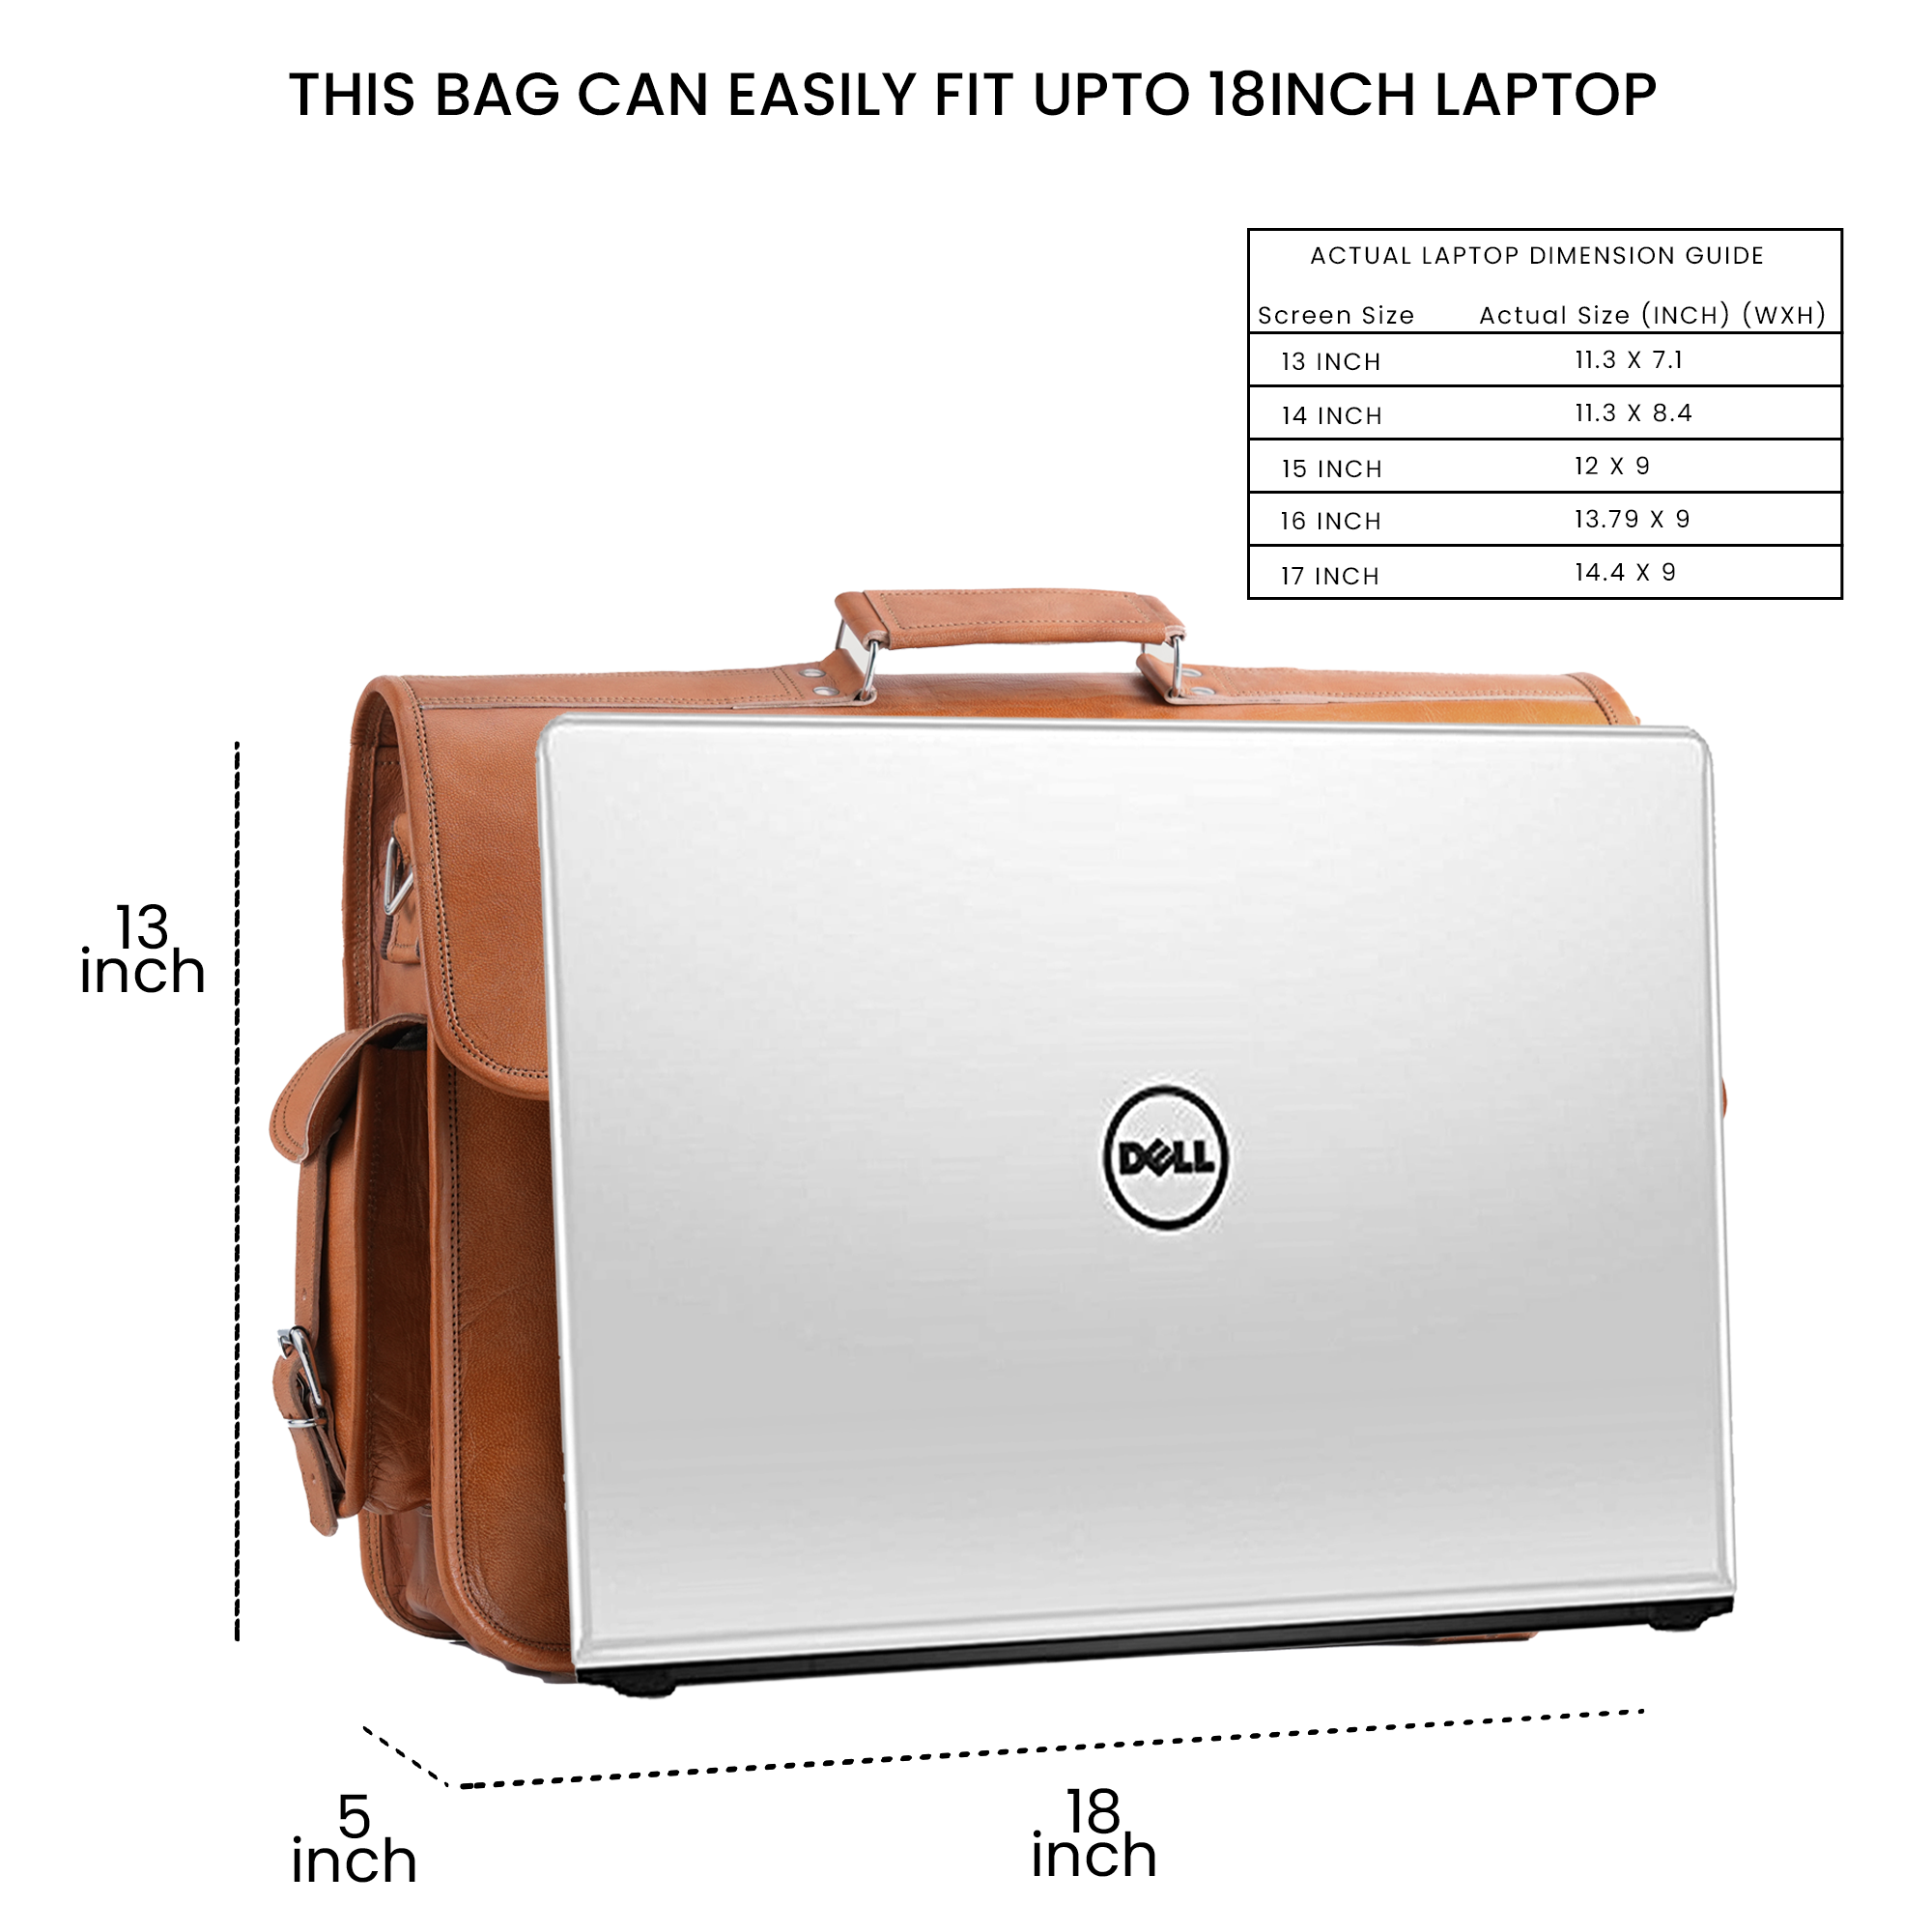 Laptop bag size comparison with actual laptop and given chart for easy comparison